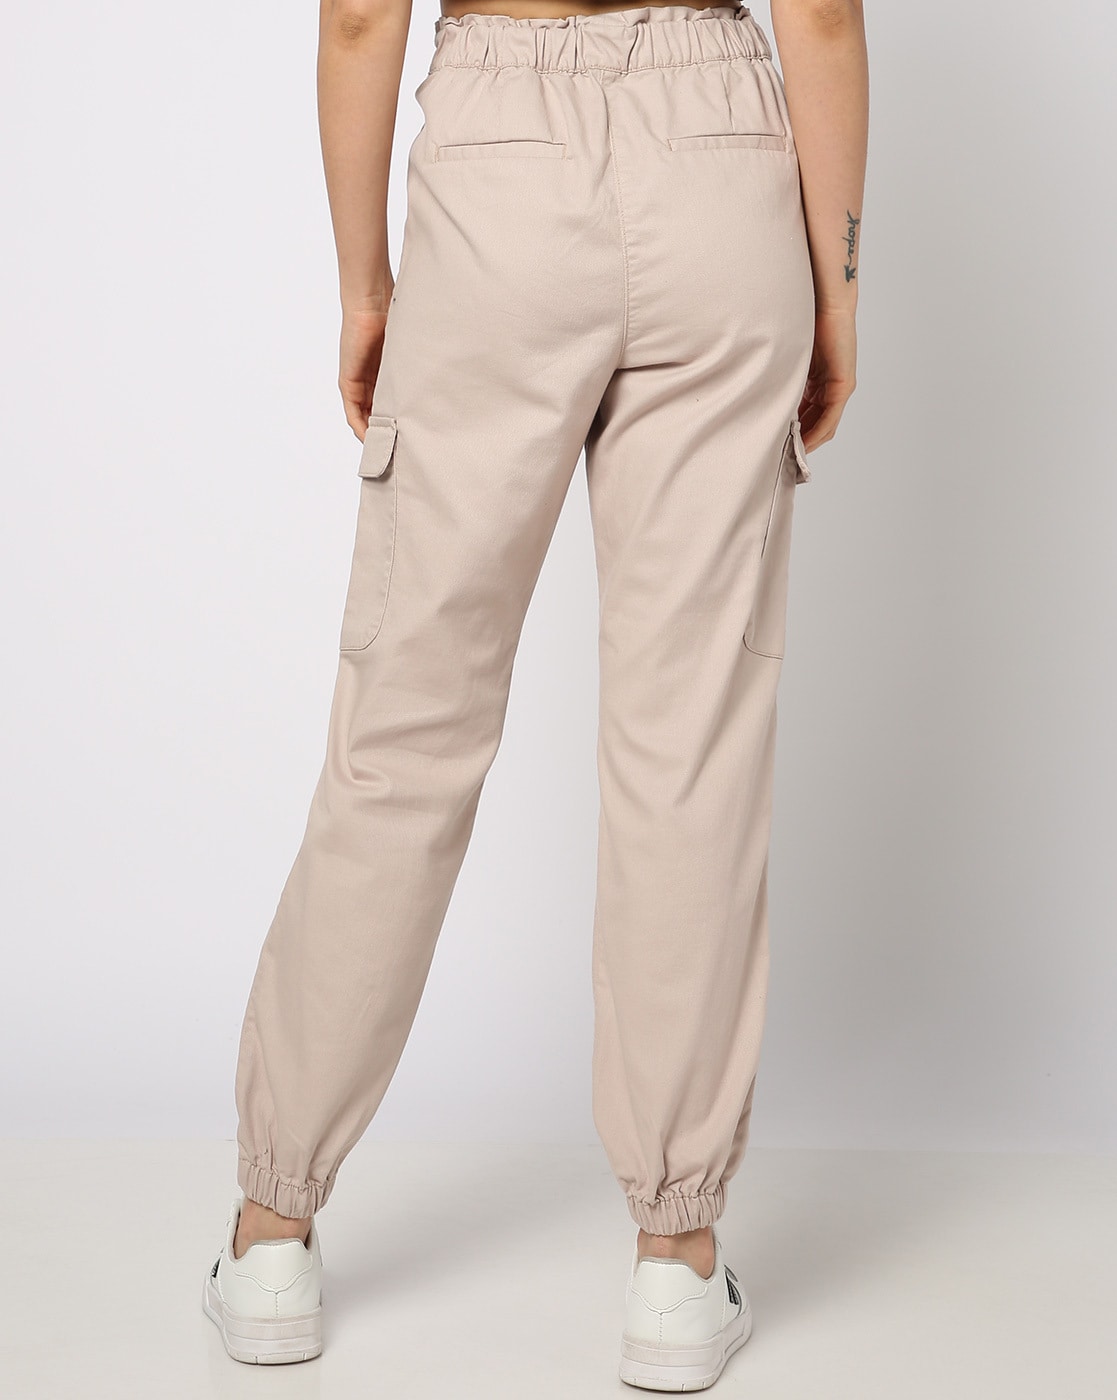 Forever 21 Cargo Pants Black Size 24 - $22 (26% Off Retail) - From Brianna